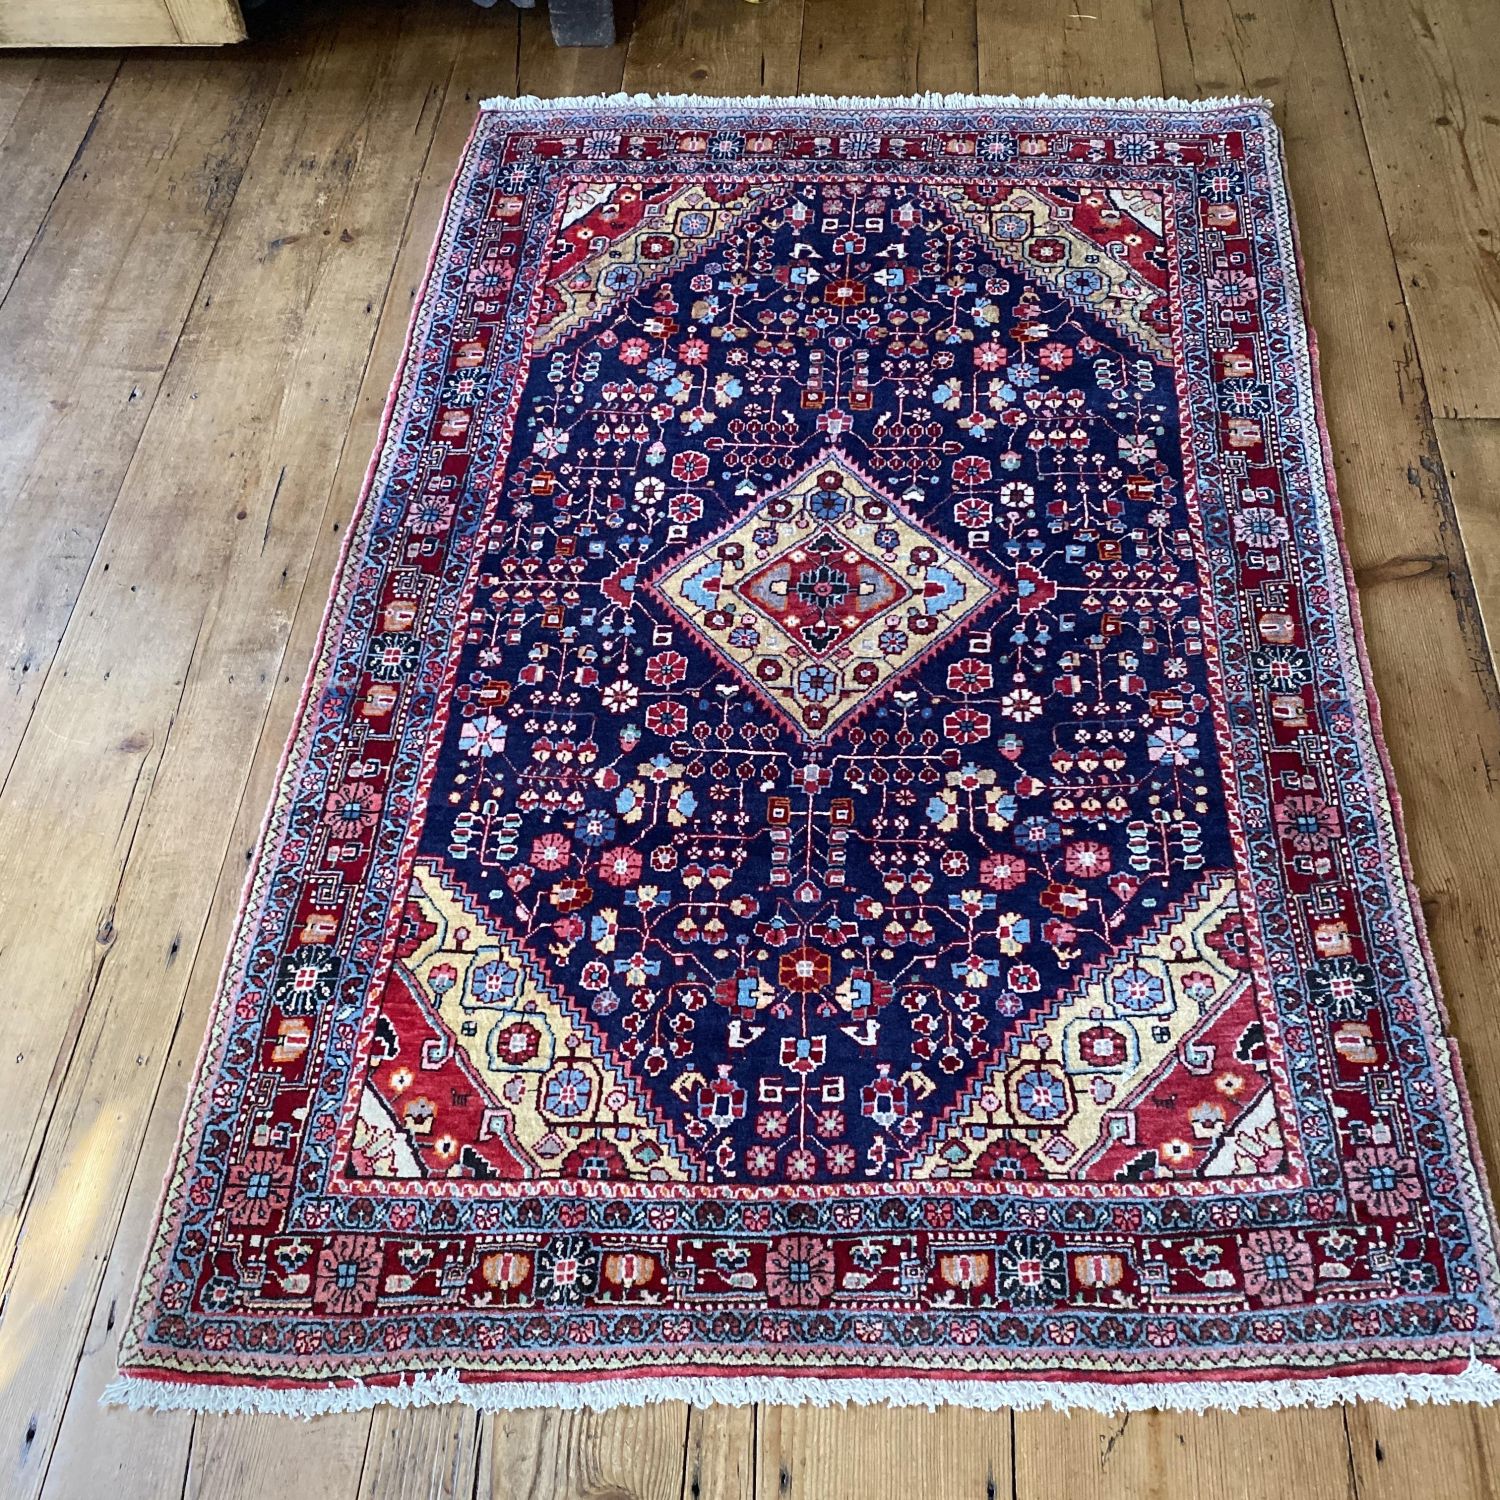 Old Hand Knotted Persian Rug Malayer, What Makes A Rug Good Quality